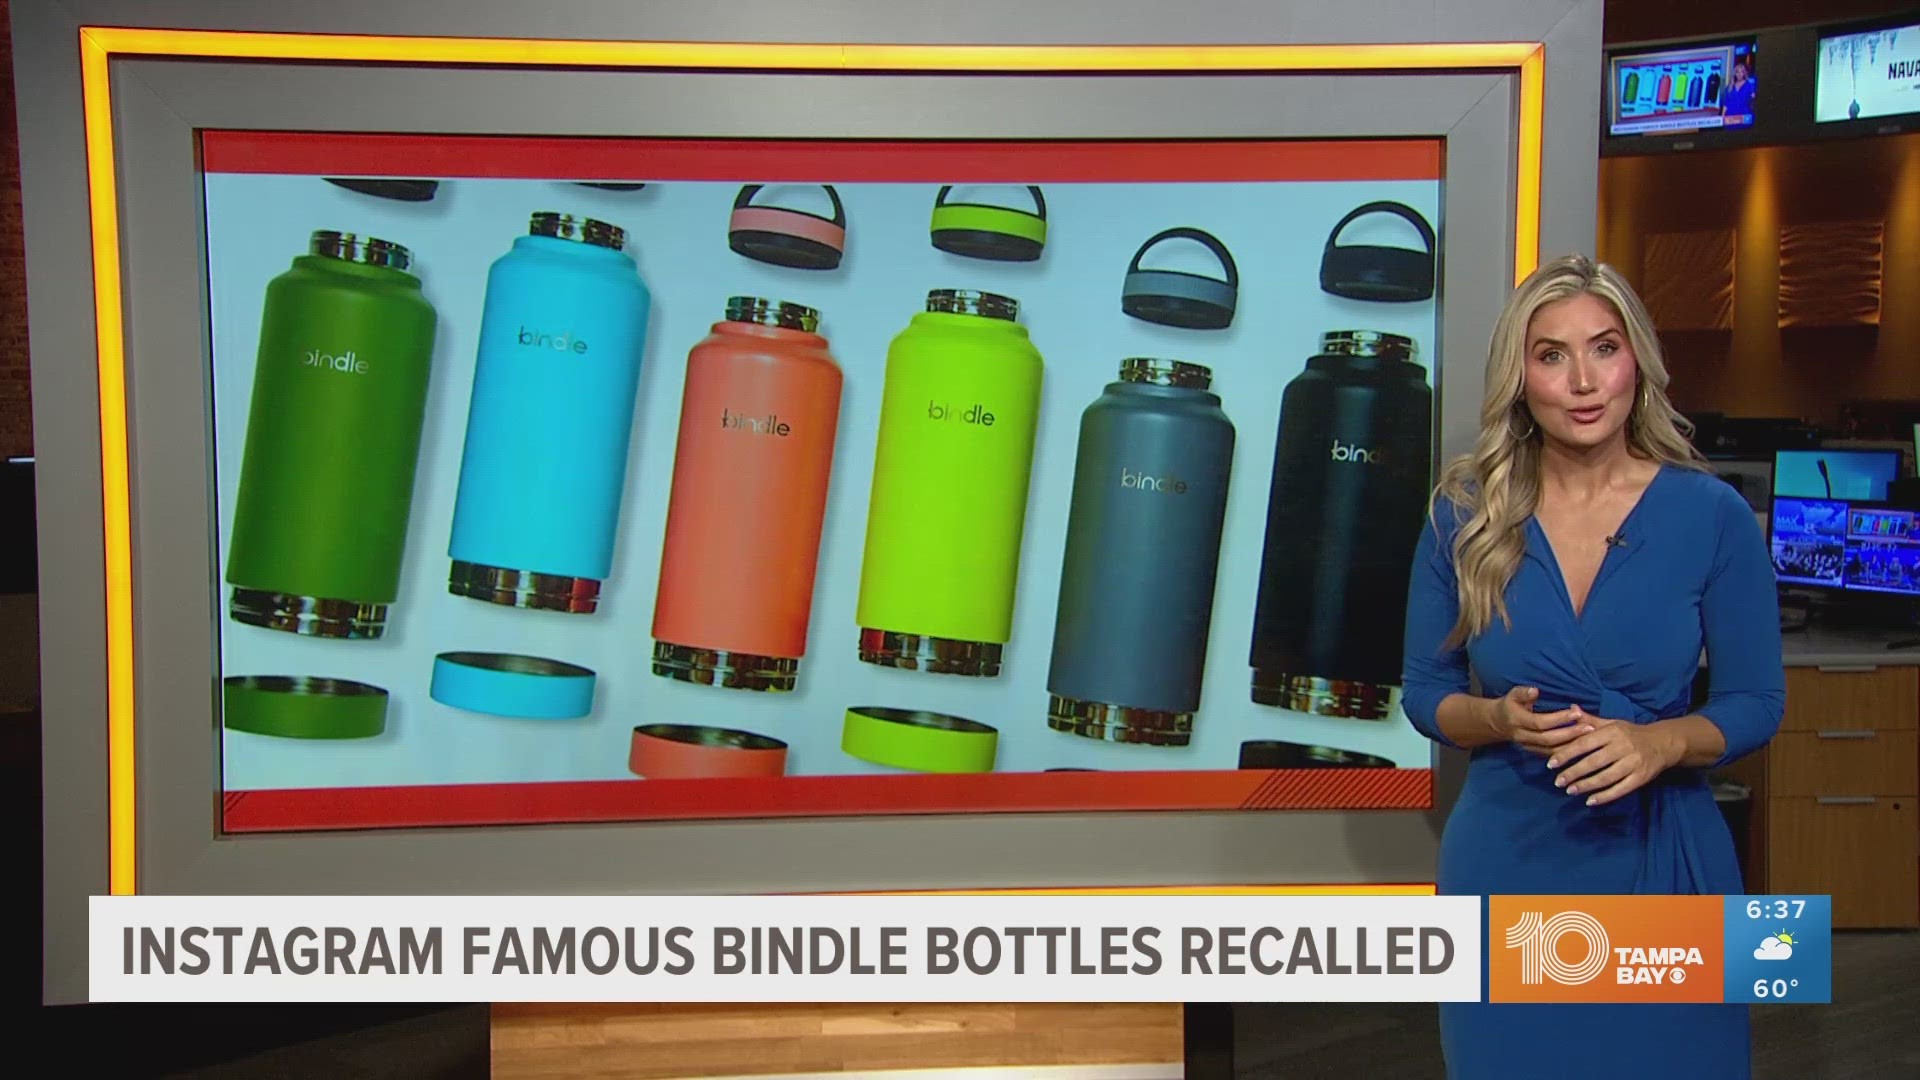 Bindle has temporarily stopped production of the Instagram-famous water bottles.